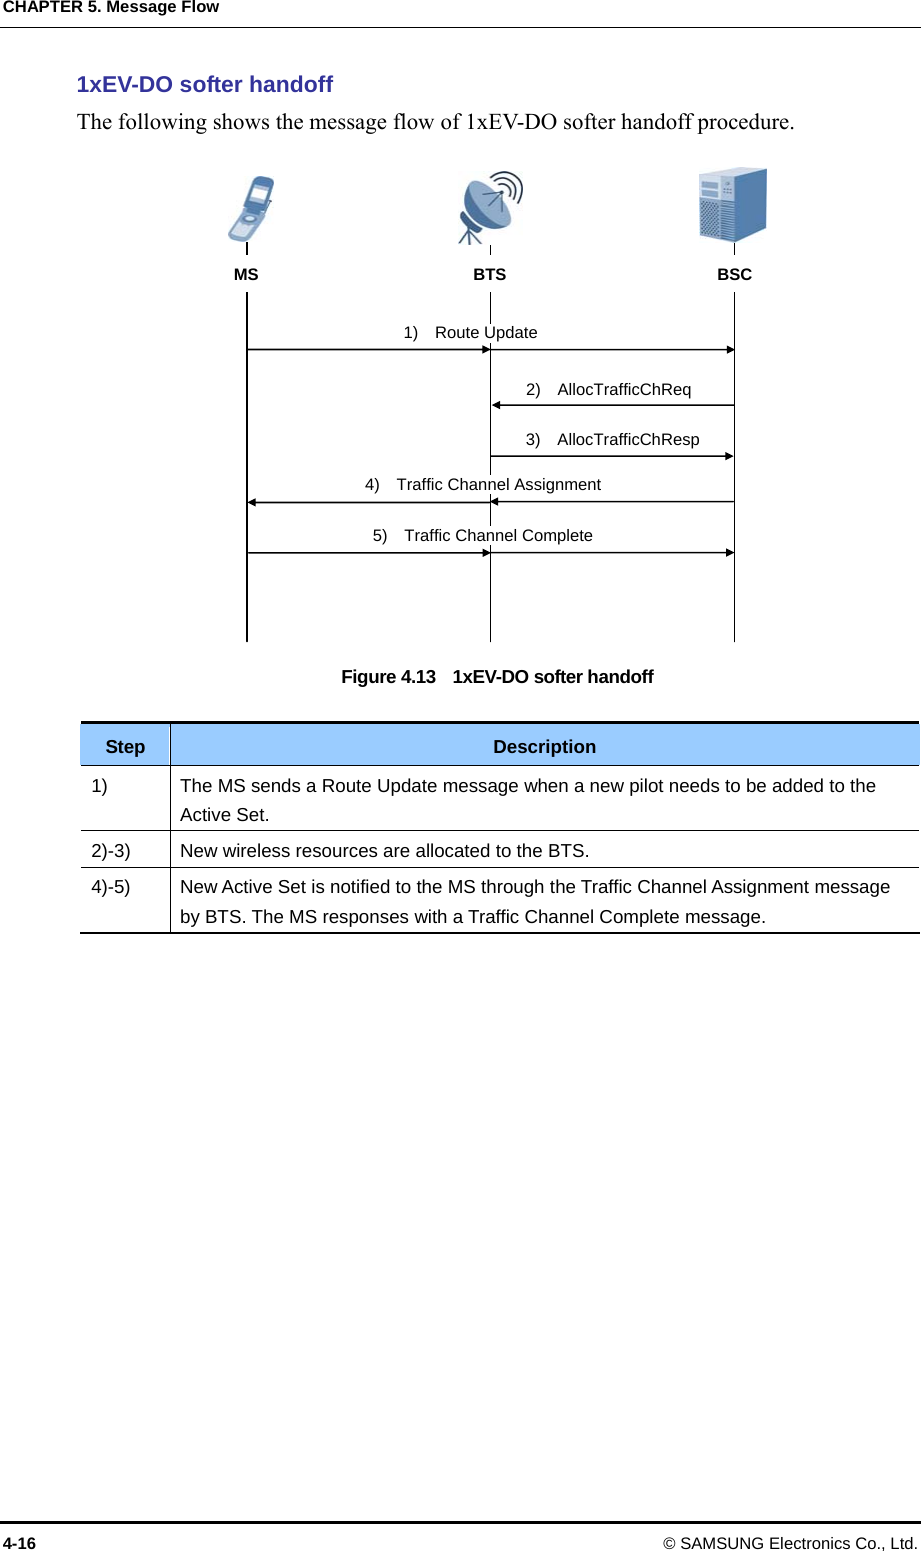 CHAPTER 5. Message Flow 4-16 © SAMSUNG Electronics Co., Ltd. 1xEV-DO softer handoff The following shows the message flow of 1xEV-DO softer handoff procedure.  Figure 4.13    1xEV-DO softer handoff  Step  Description 1)  The MS sends a Route Update message when a new pilot needs to be added to the Active Set. 2)-3)  New wireless resources are allocated to the BTS.   4)-5)  New Active Set is notified to the MS through the Traffic Channel Assignment message by BTS. The MS responses with a Traffic Channel Complete message.  MS  BTS BSC 3)  AllocTrafficChResp 4)  Traffic Channel Assignment 5)  Traffic Channel Complete 2)  AllocTrafficChReq 1)  Route Update  